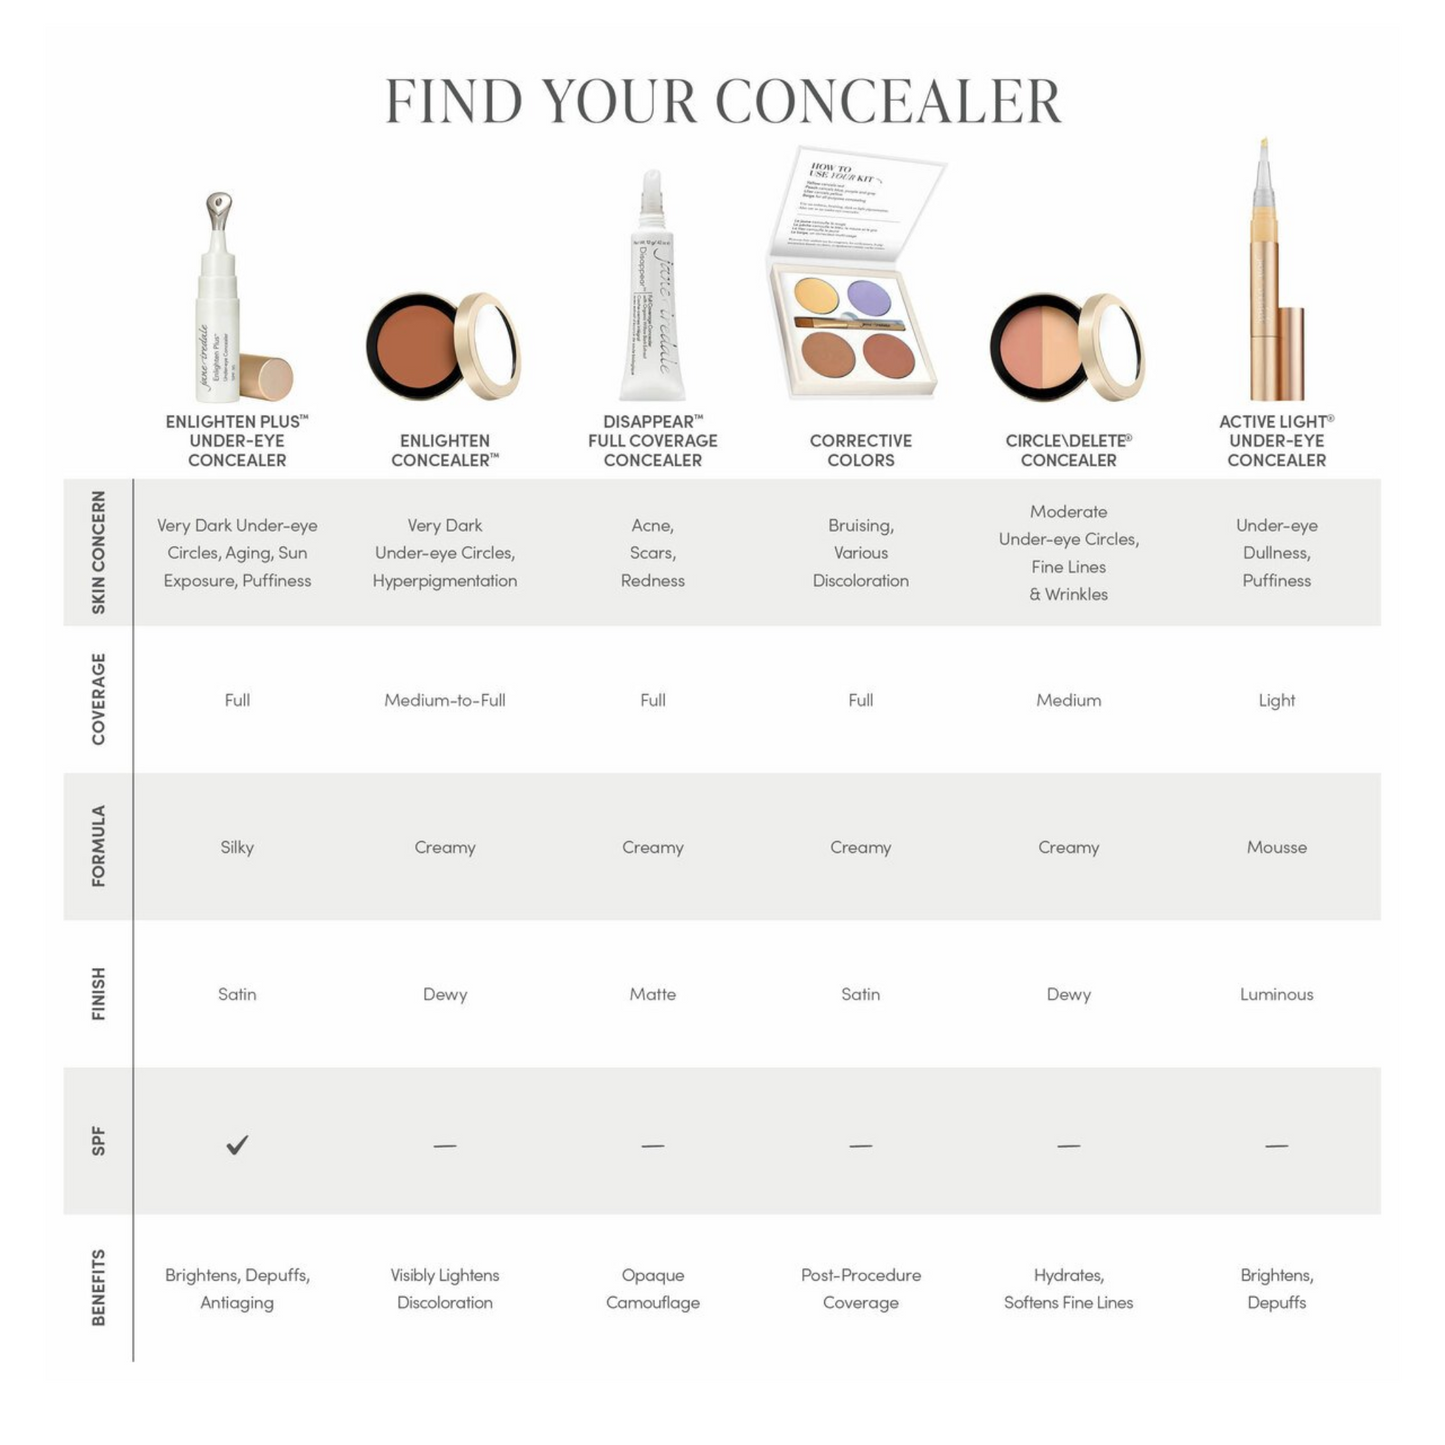 Jane Iredale Disappear Full-Coverage Concealer - Medium